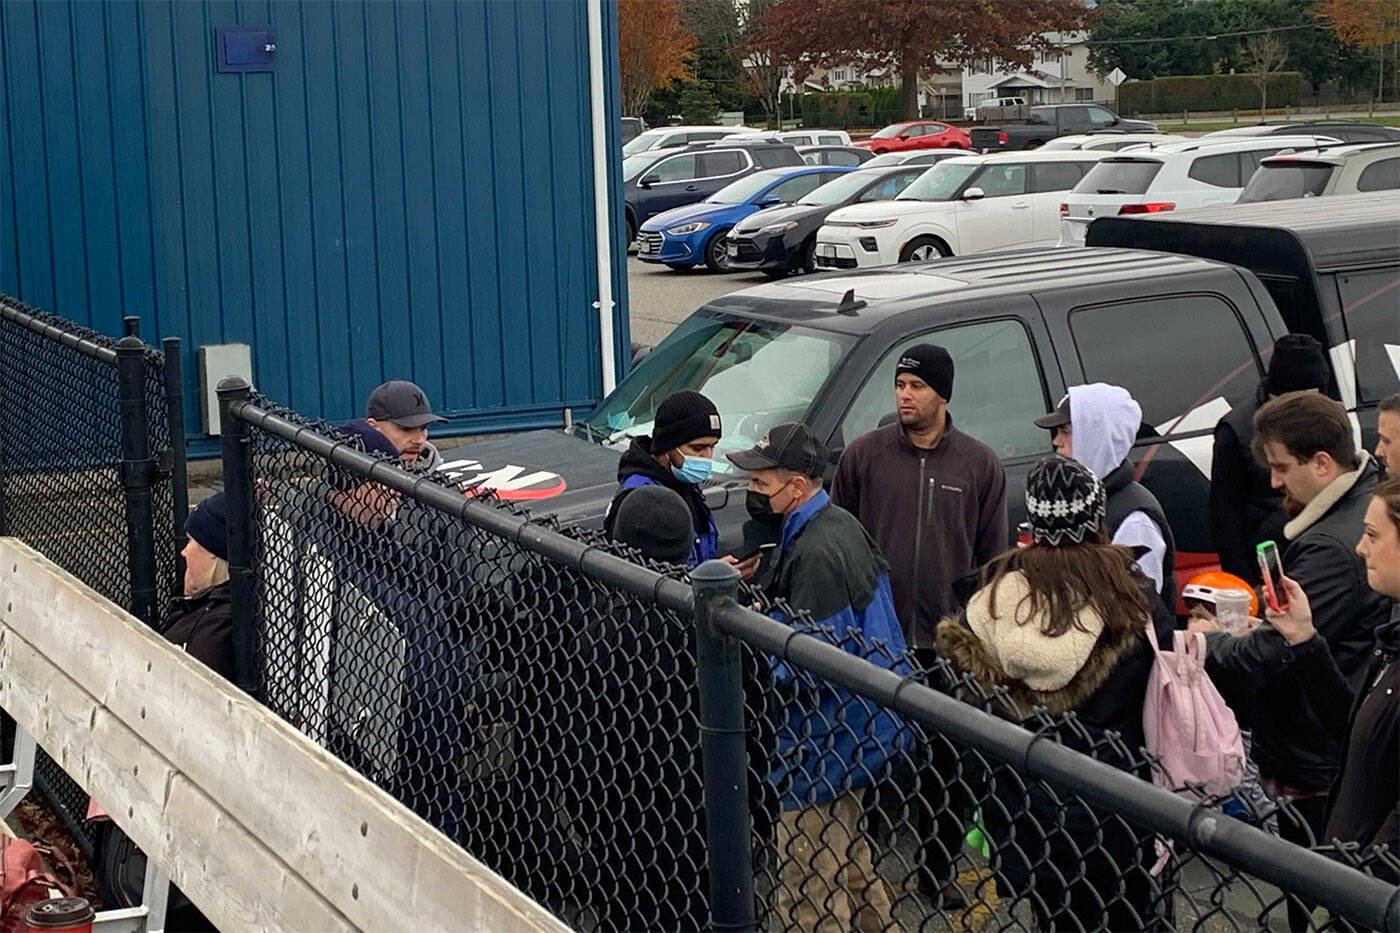 A small group of anti-vaxxers refused to show their vaccination status and got past security and into a Chilliwack Giants football game at Townsend Park on Saturday, Nov. 6, 2021. (Submitted)